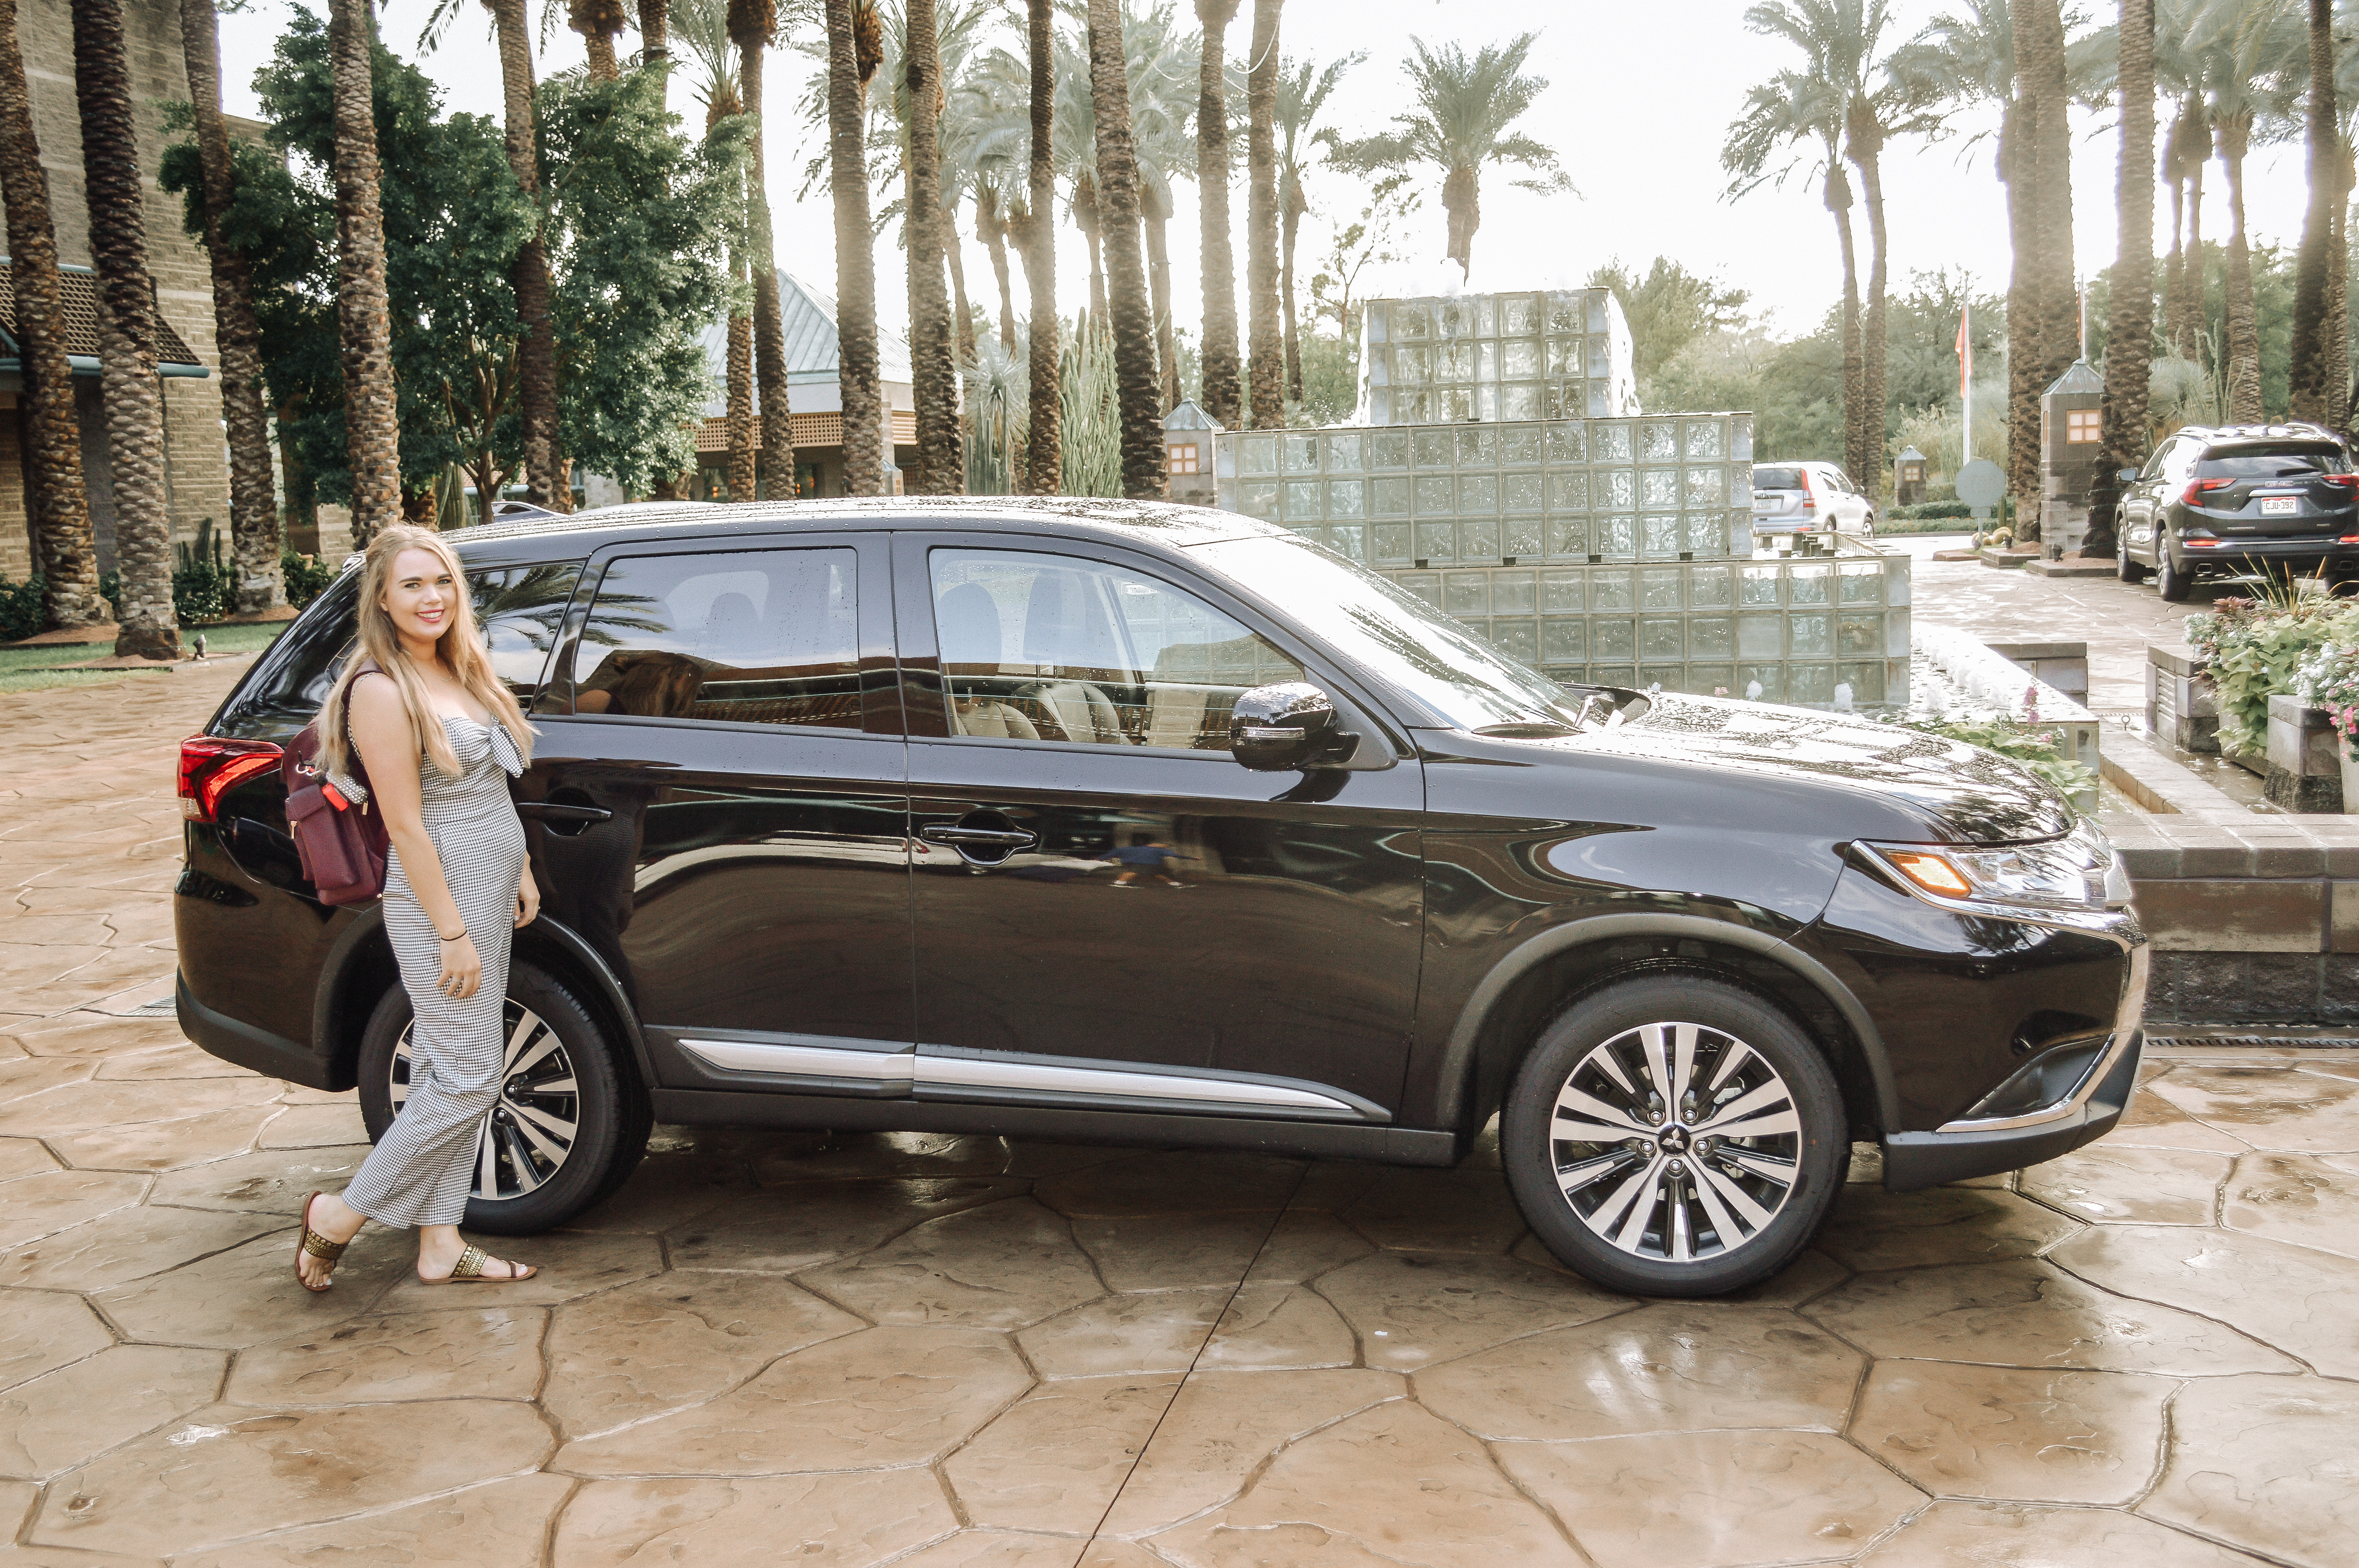 Mitsubishi Outlander | The Best Phoenix Travel Guide featured by top Denver travel guide, All Things Lovely